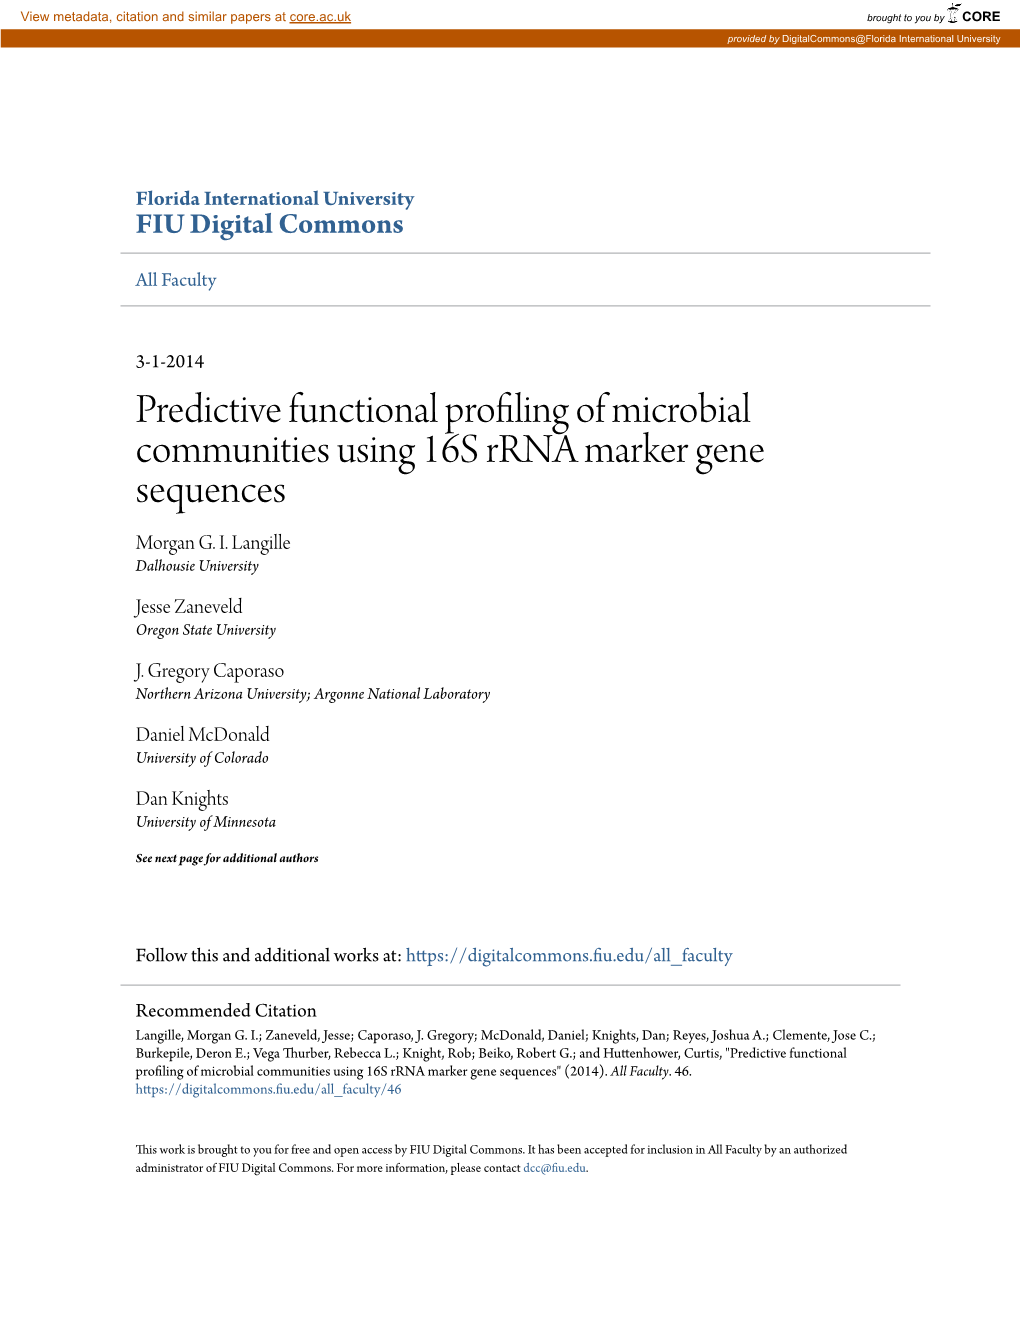 Predictive Functional Profiling of Microbial Communities Using 16S Rrna Marker Gene Sequences Morgan G